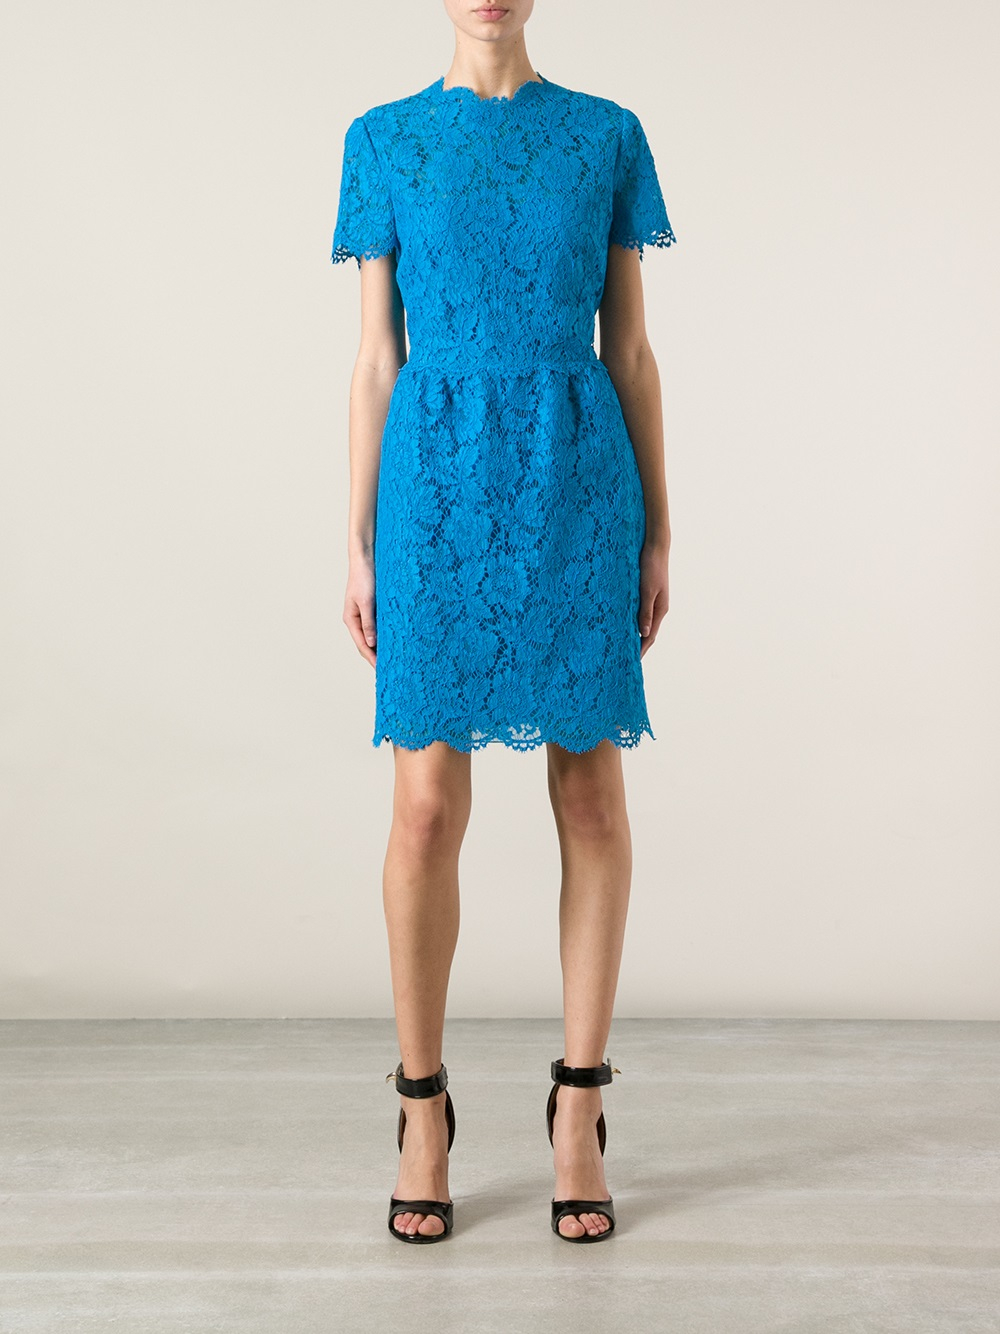 Lyst - Valentino Floral Lace Dress in Blue